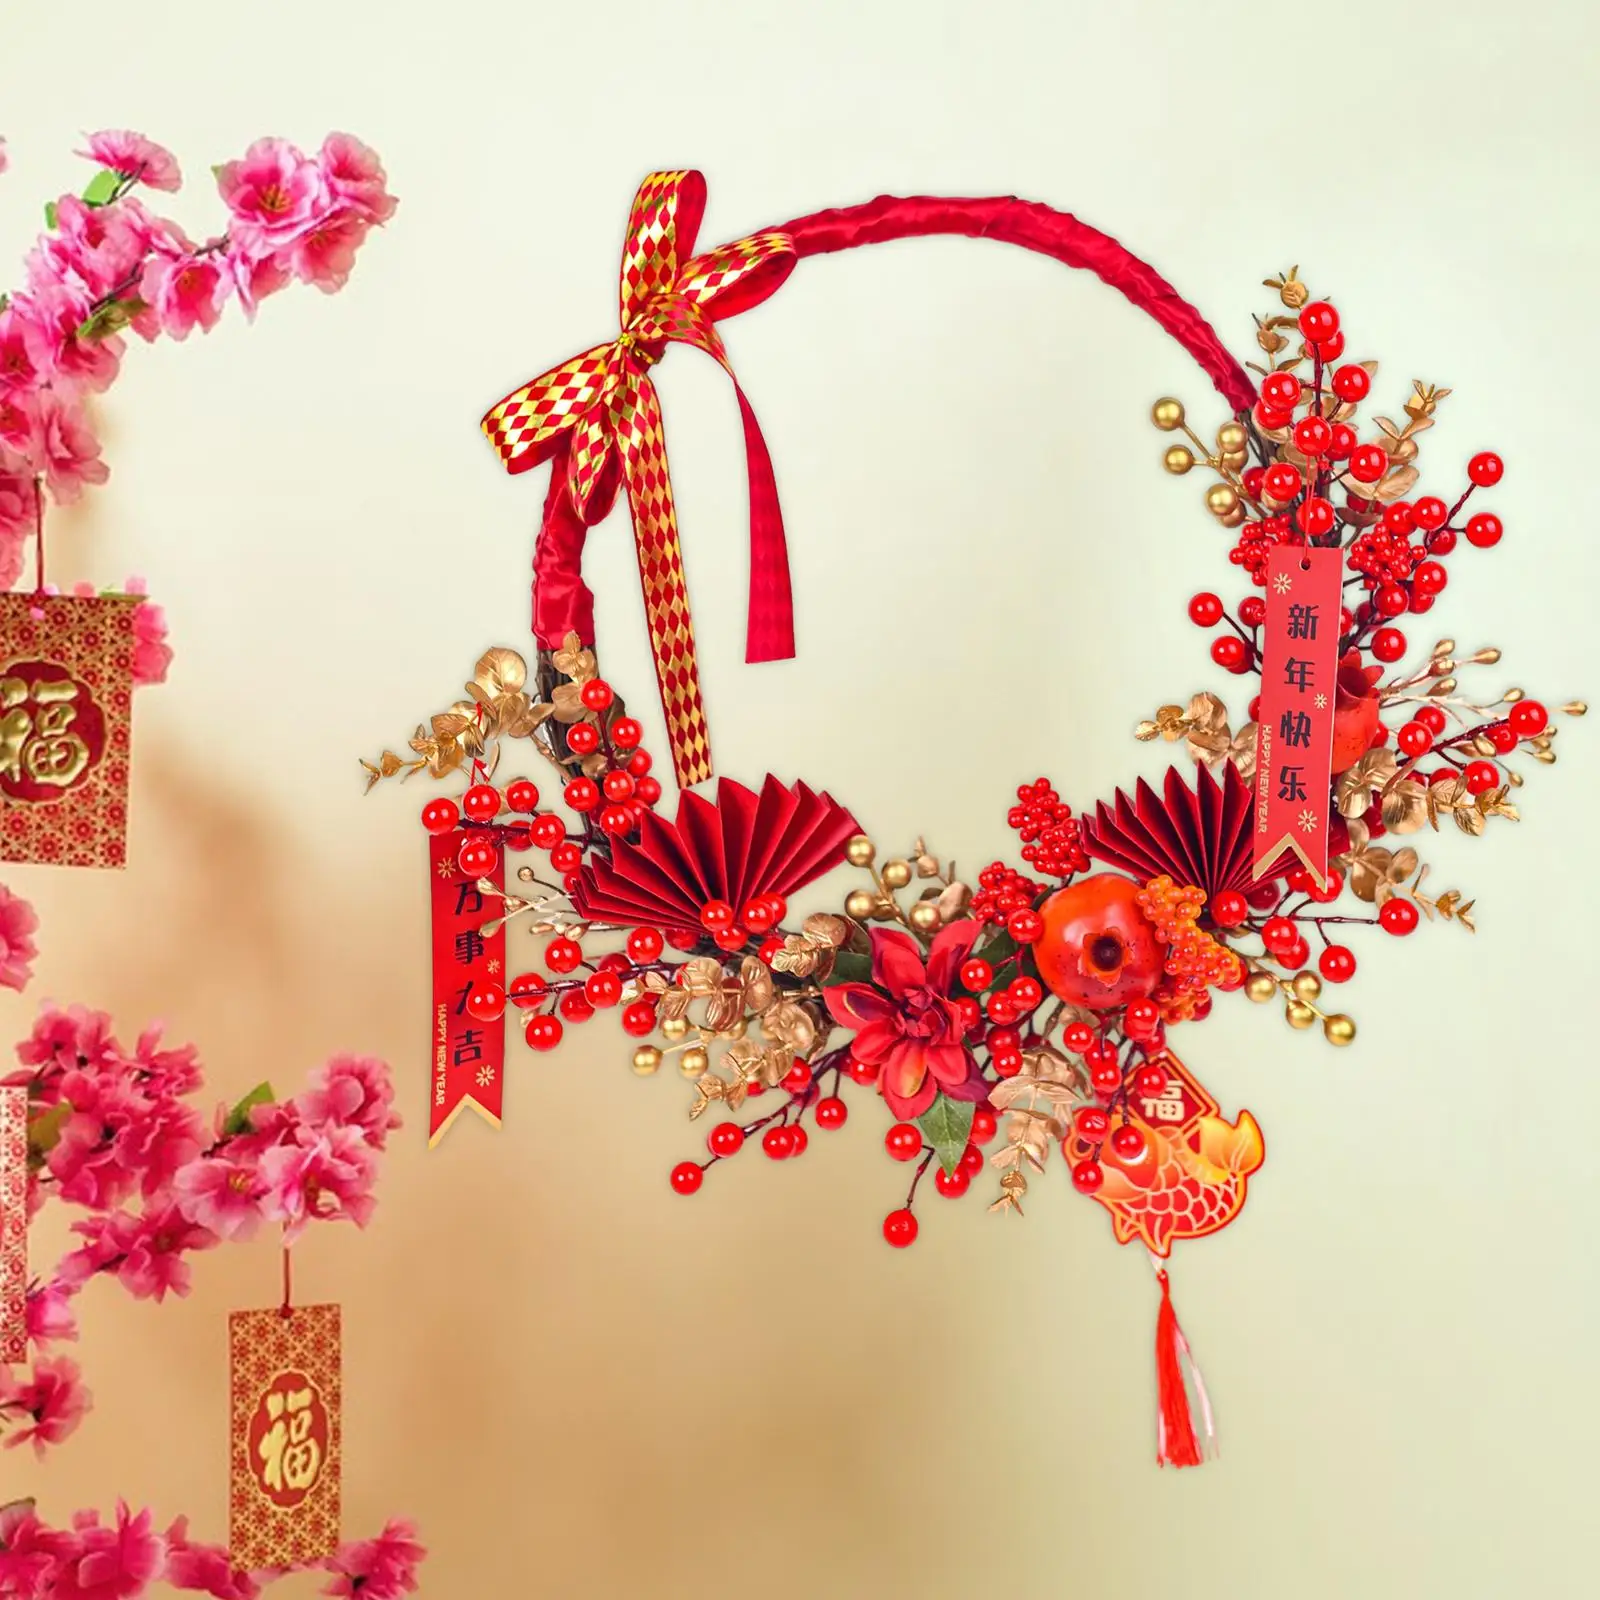 Chinese New Year Wreath Front Door Wreath Home Decor Artificial Flower Wreath for Celebration Wedding Outdoor Festival Holiday